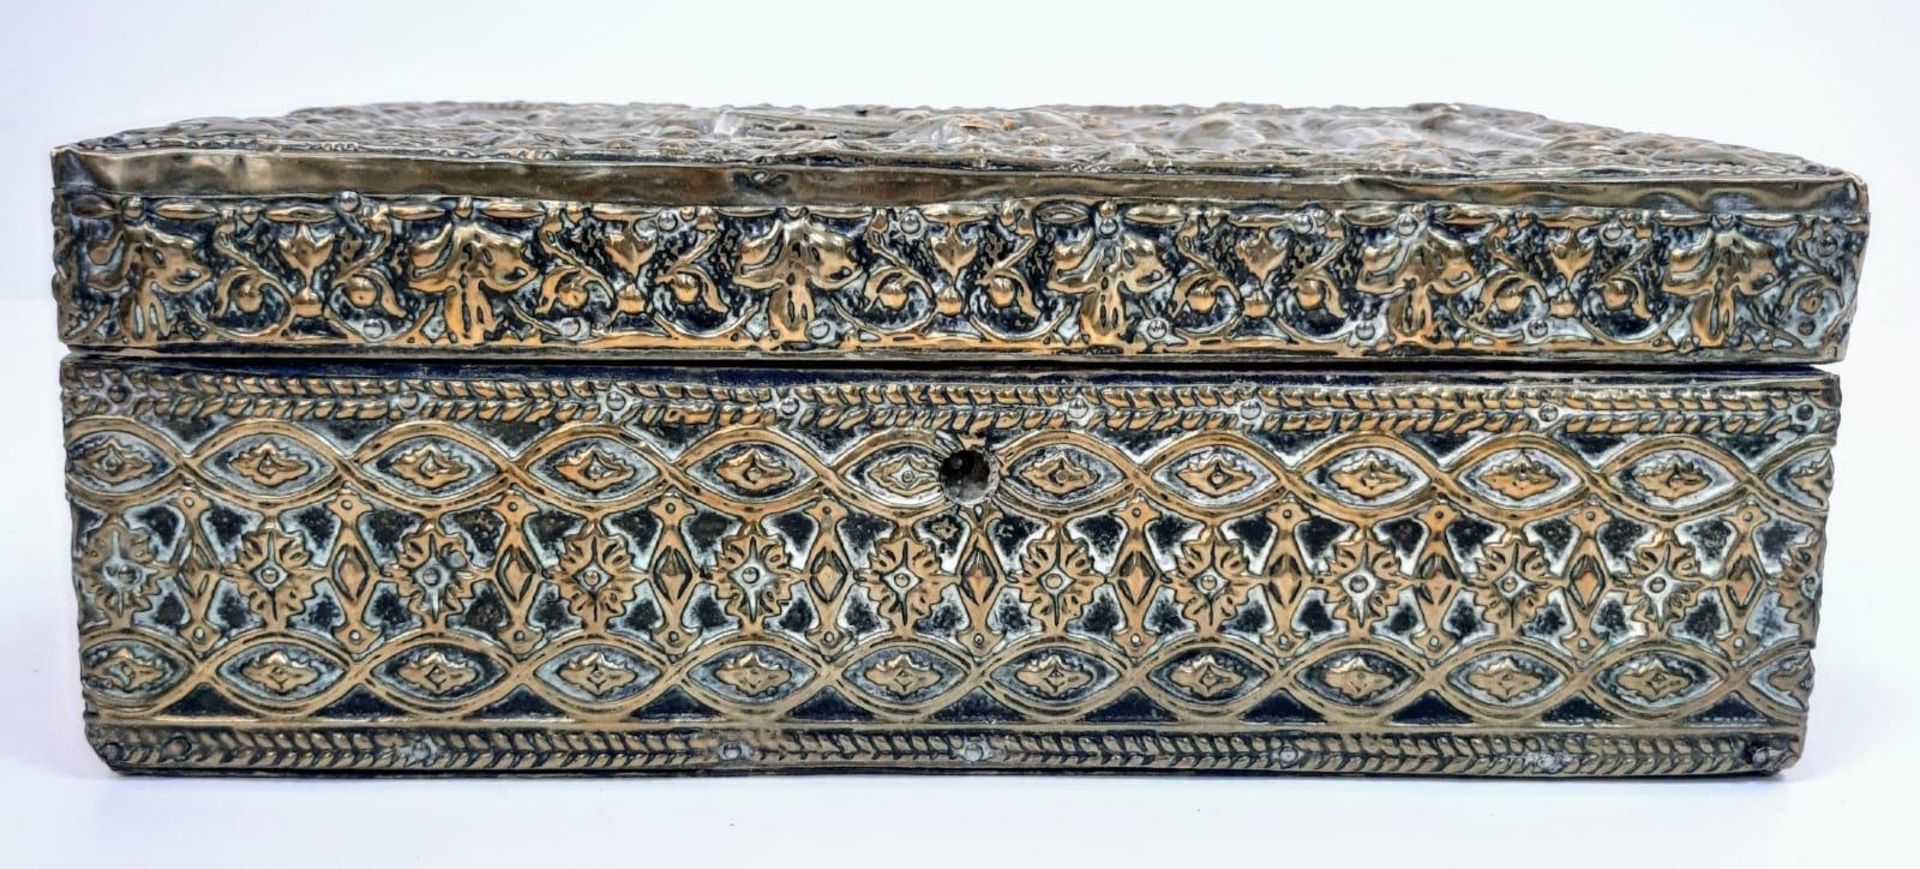 A Beautiful Large French Late 19th Century Bronze/Brass Box. Highly decorative with Neo classical - Image 3 of 7